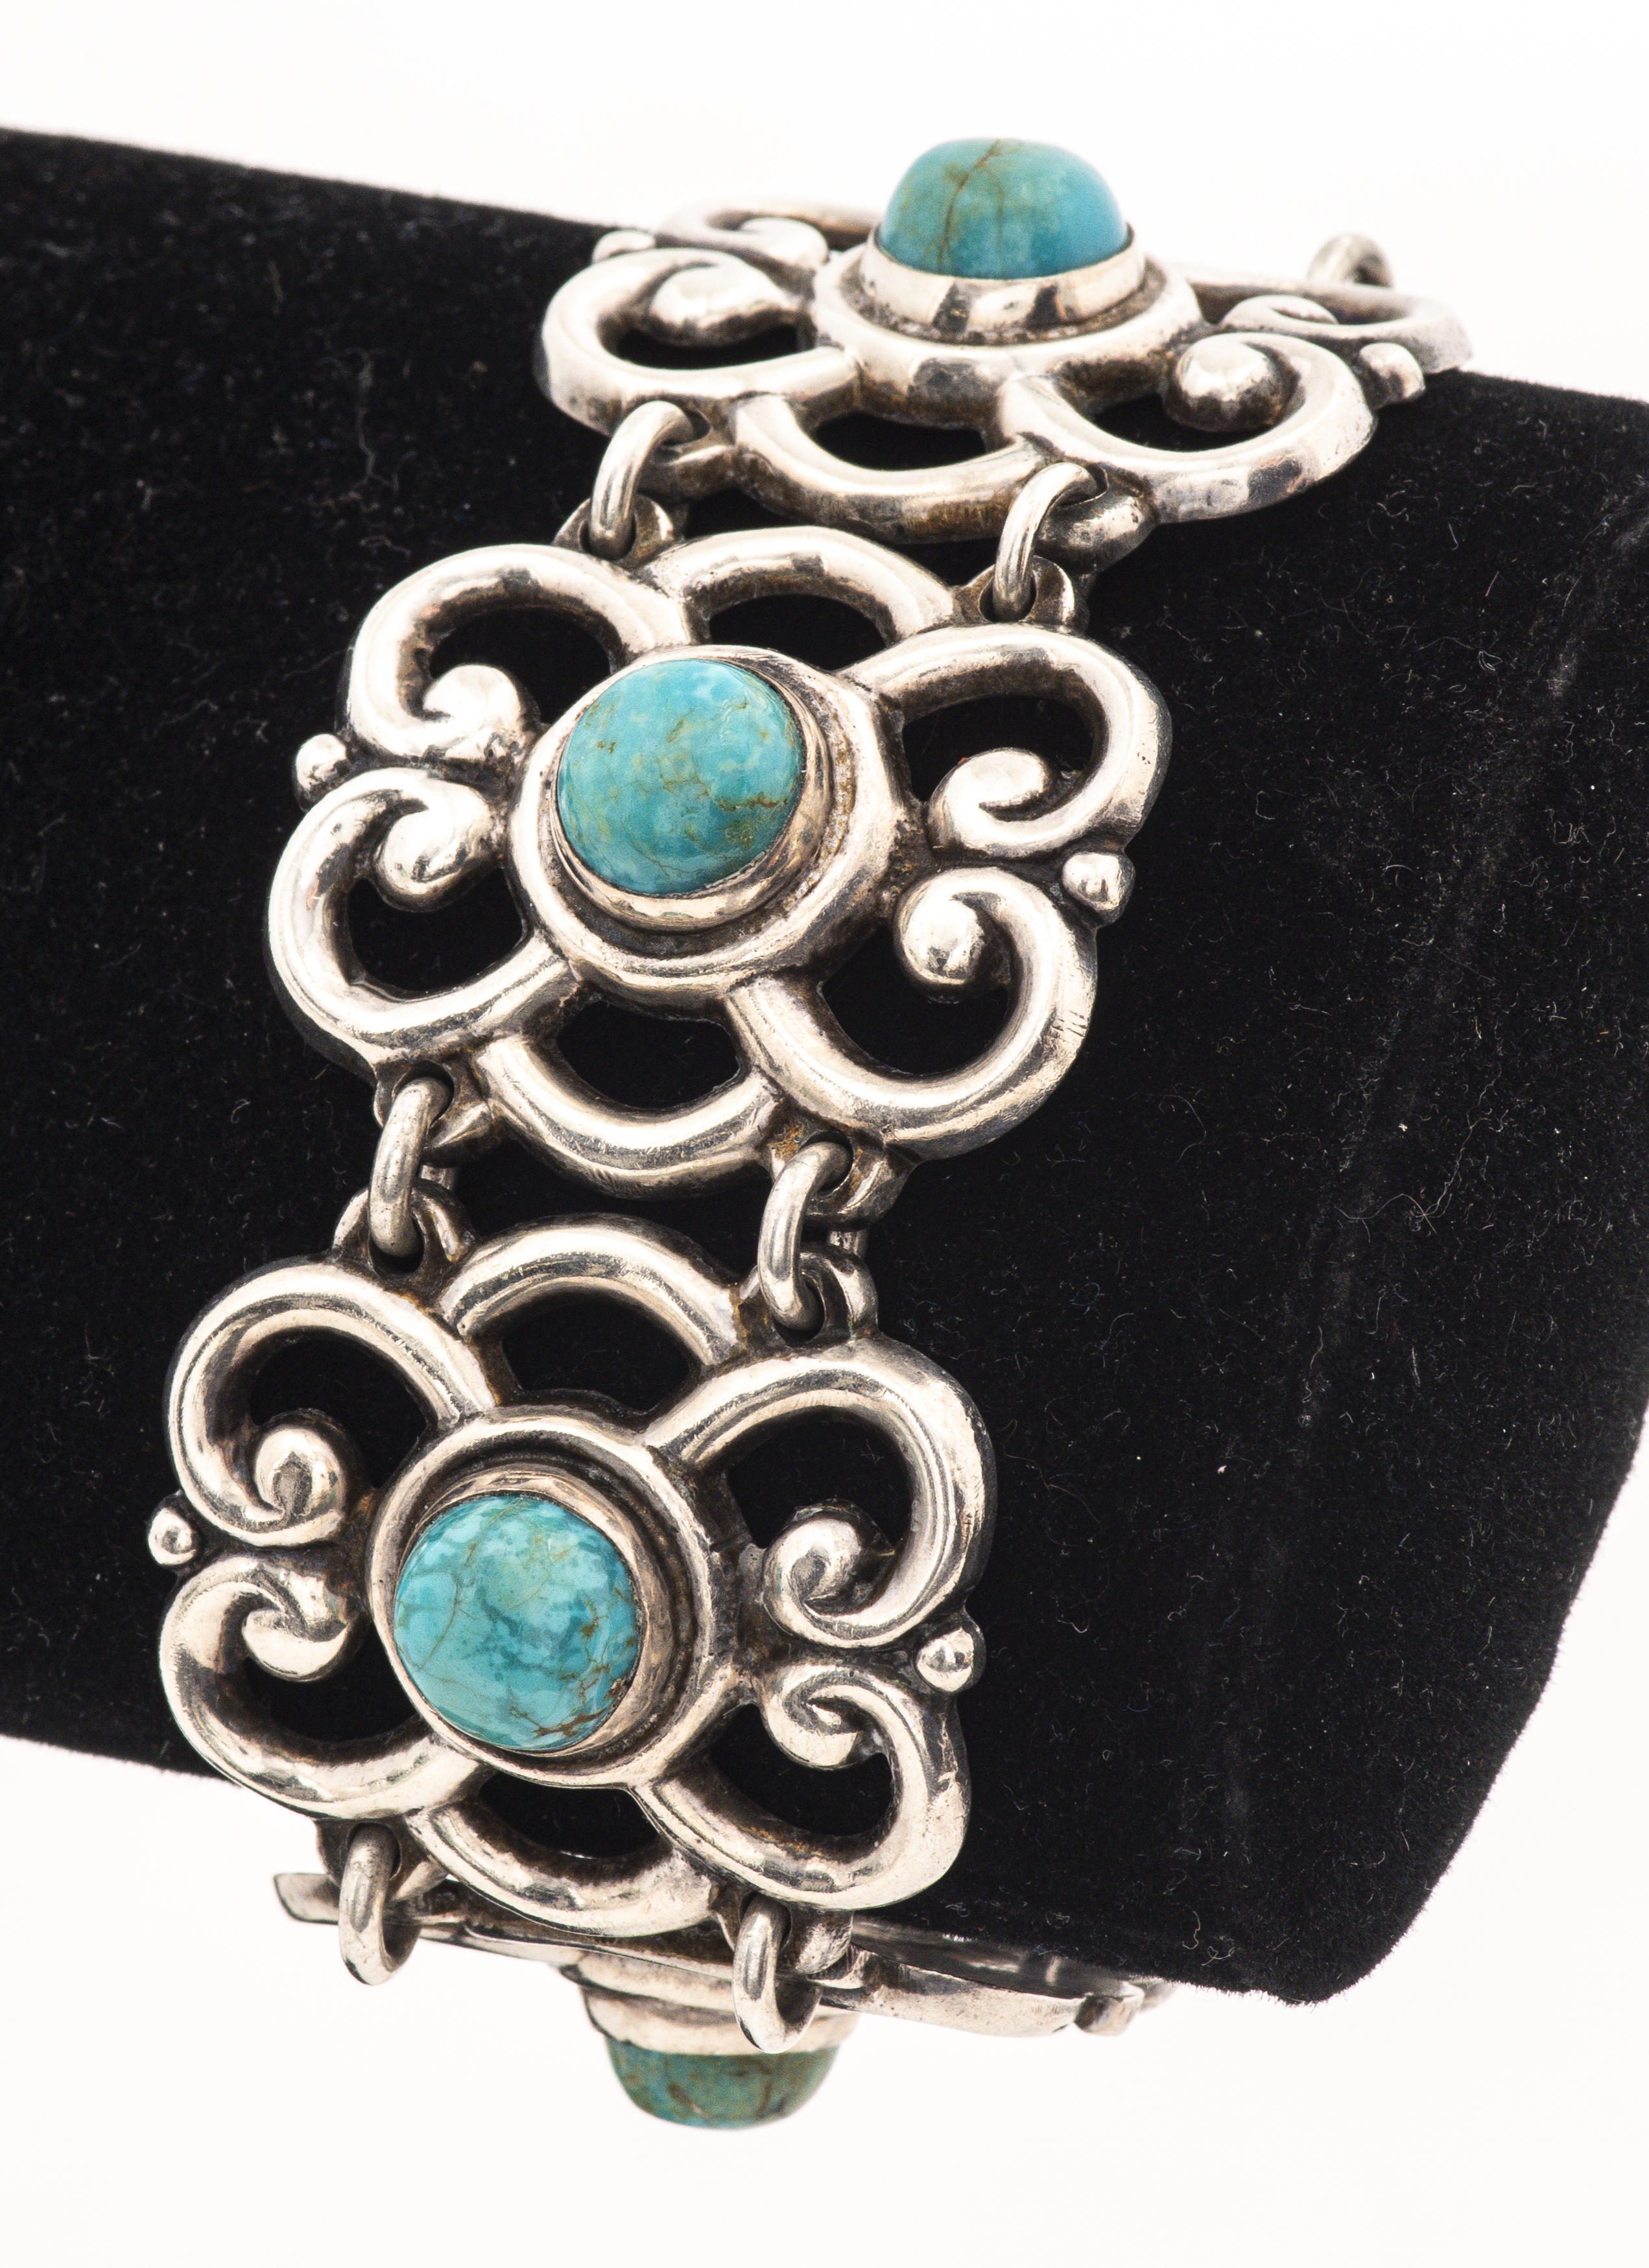 VINTAGE TAXCO MEXICAN SILVER TURQUOISE 3c58b7